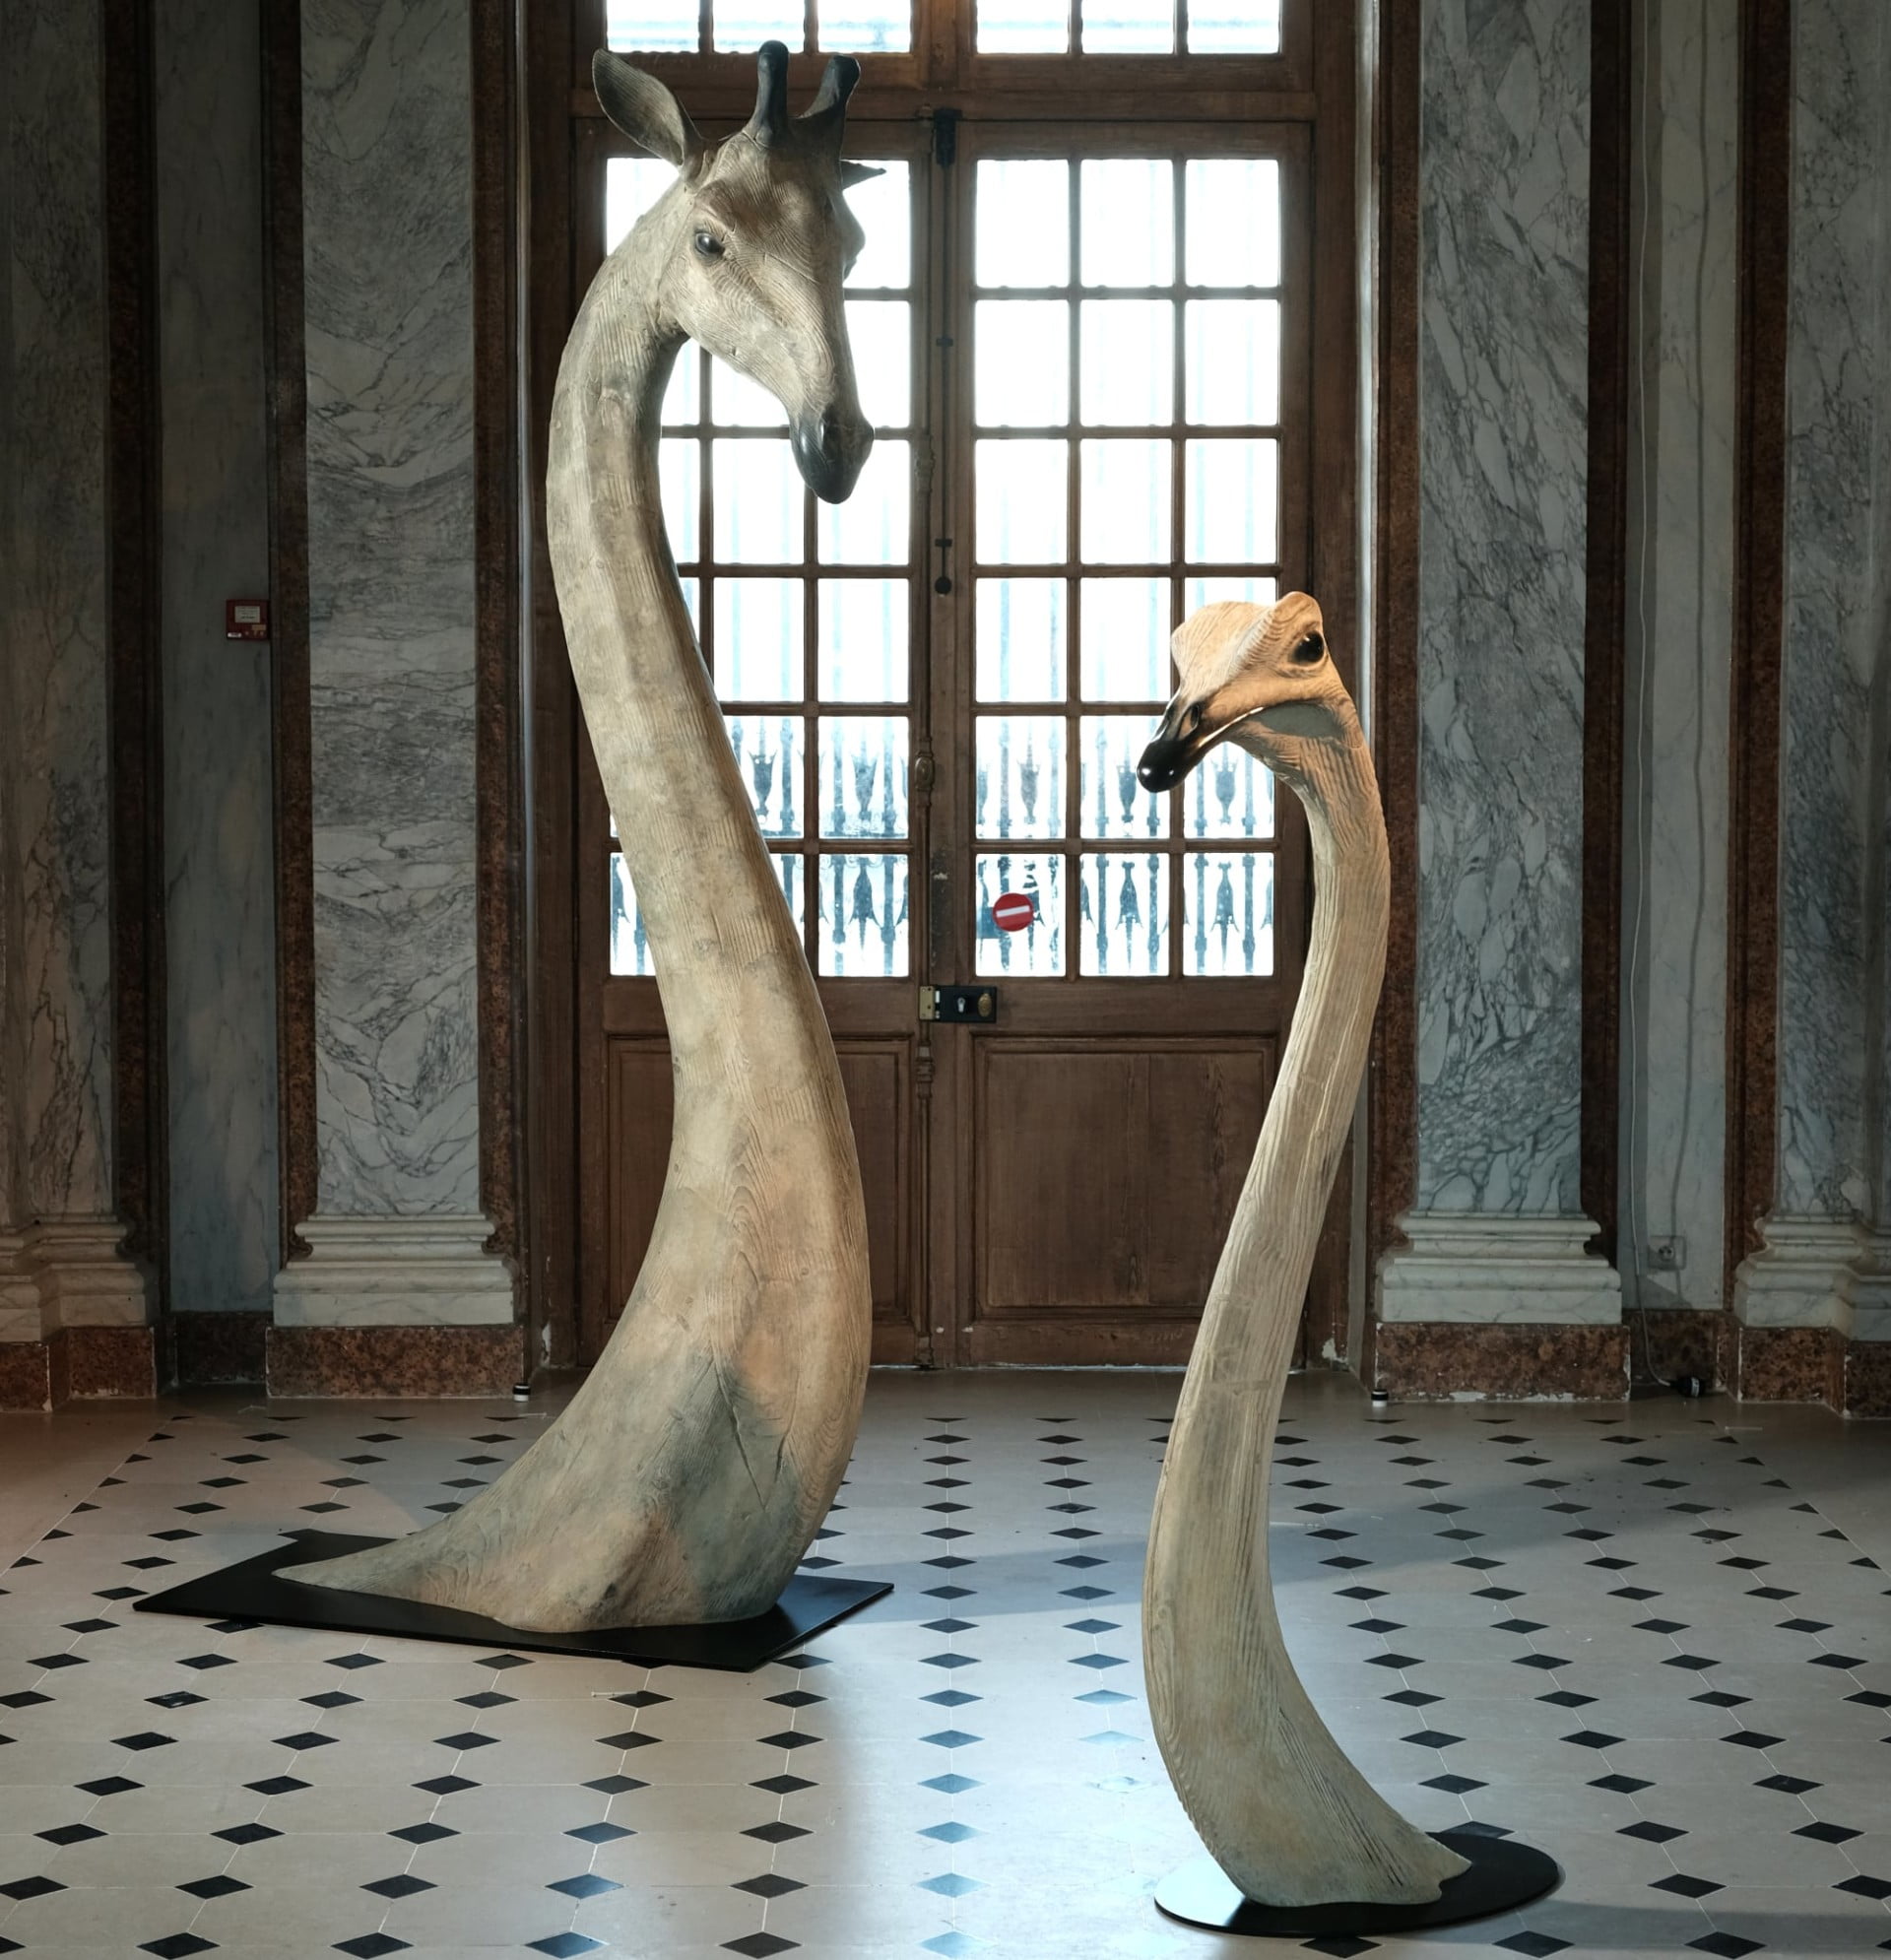 A photo of oversized sculptures of giraffe and emu